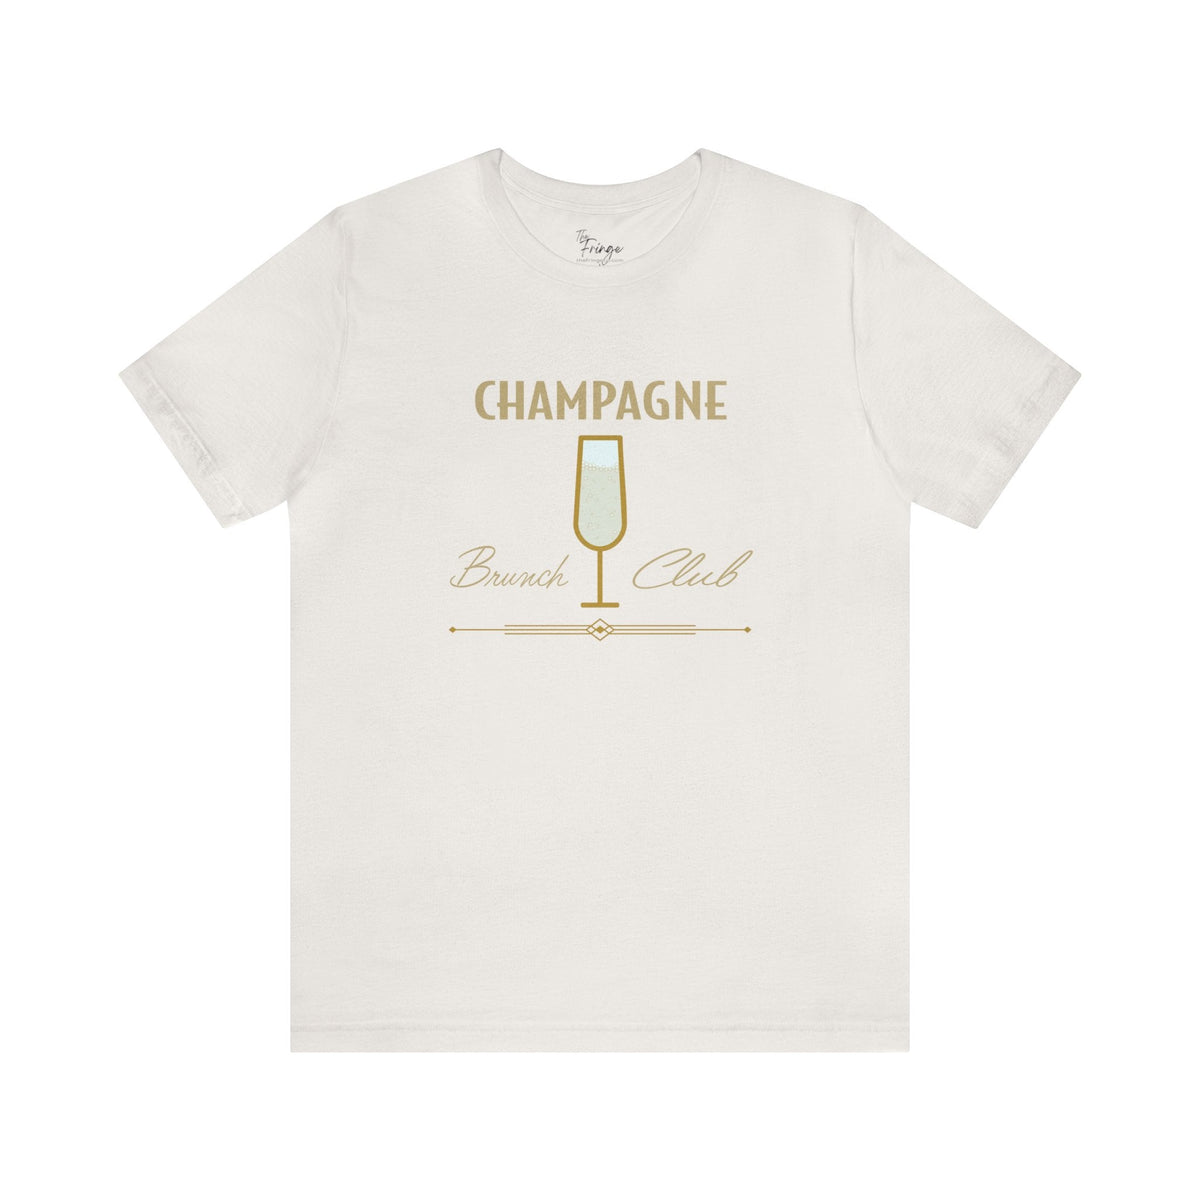 Champagne Brunch Club Graphic Tee | Girls Trip T-shirt | Bottomless Mimosa Girls | Gift for Friend T-Shirt TheFringeCultureCollective